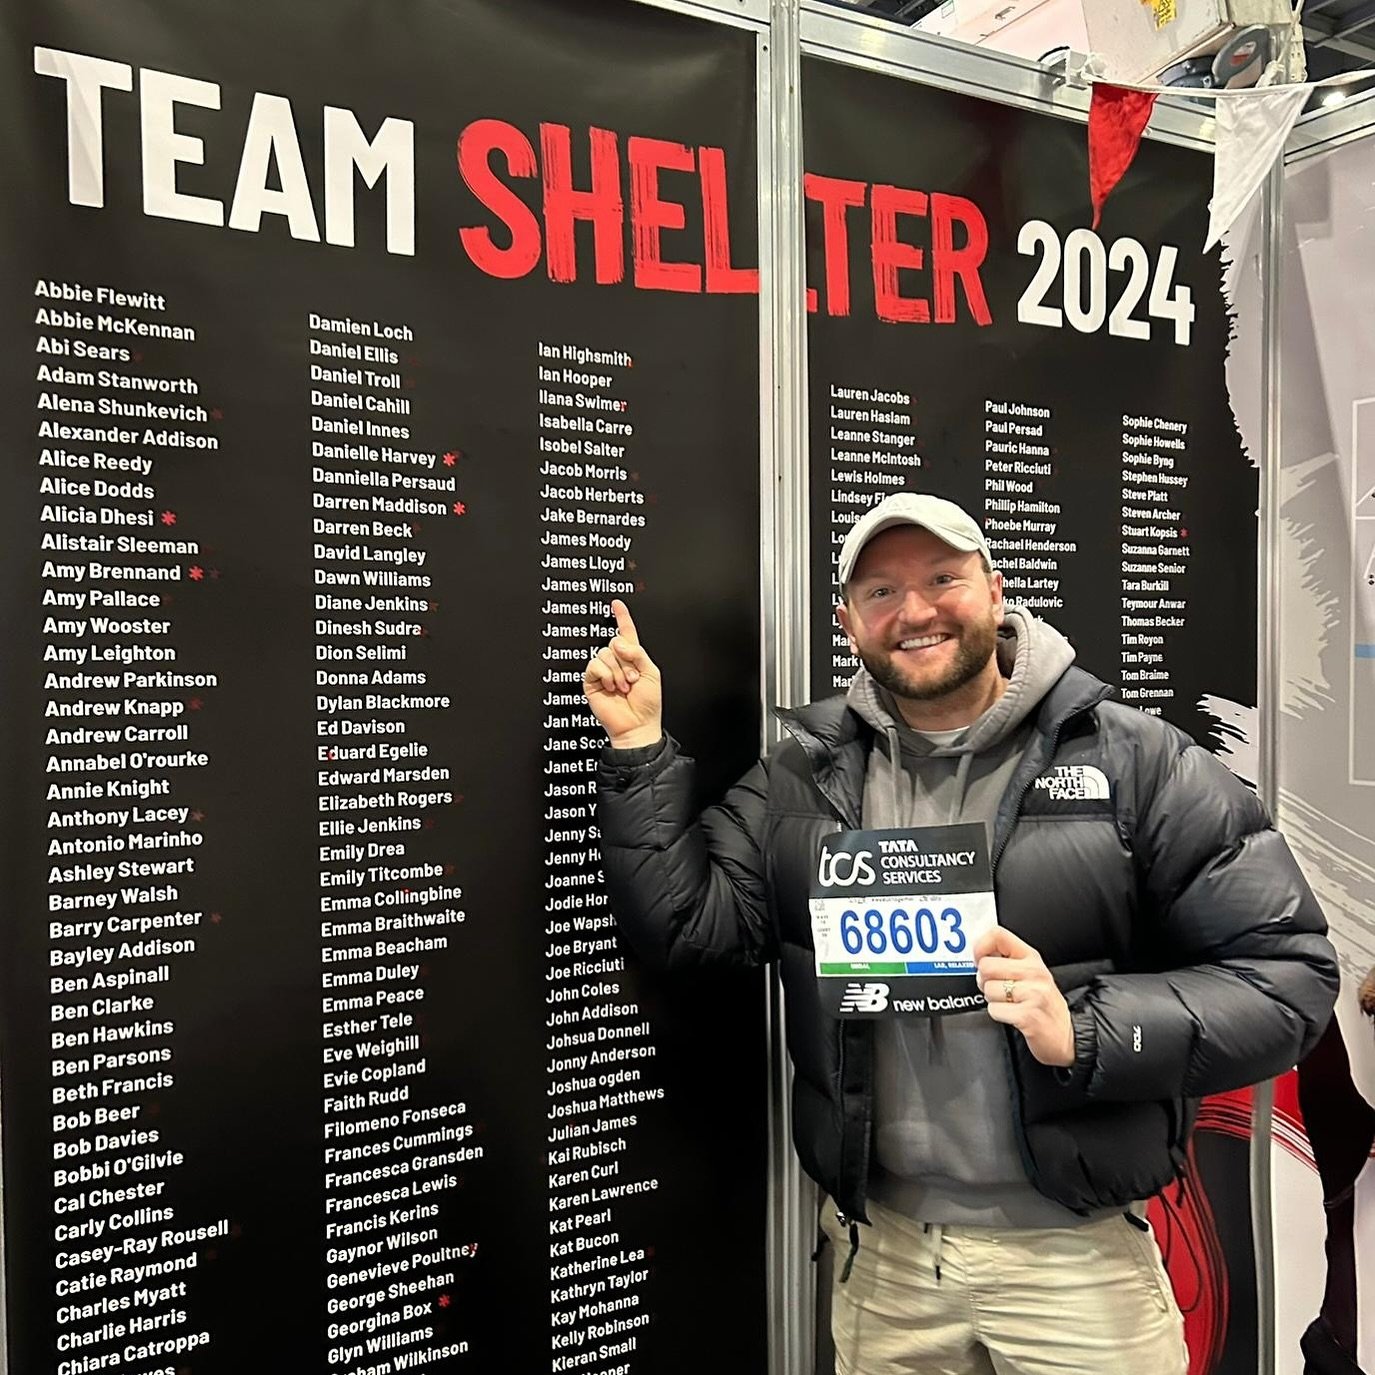 Our very own James Wilson is running the London Marathon tomorrow in aid of Shelter! We&rsquo;ll be supporting you every step of the way &hearts;️

If you&rsquo;d like to donate to Shelter via James&rsquo;s fundraising page, you can do so via the lin